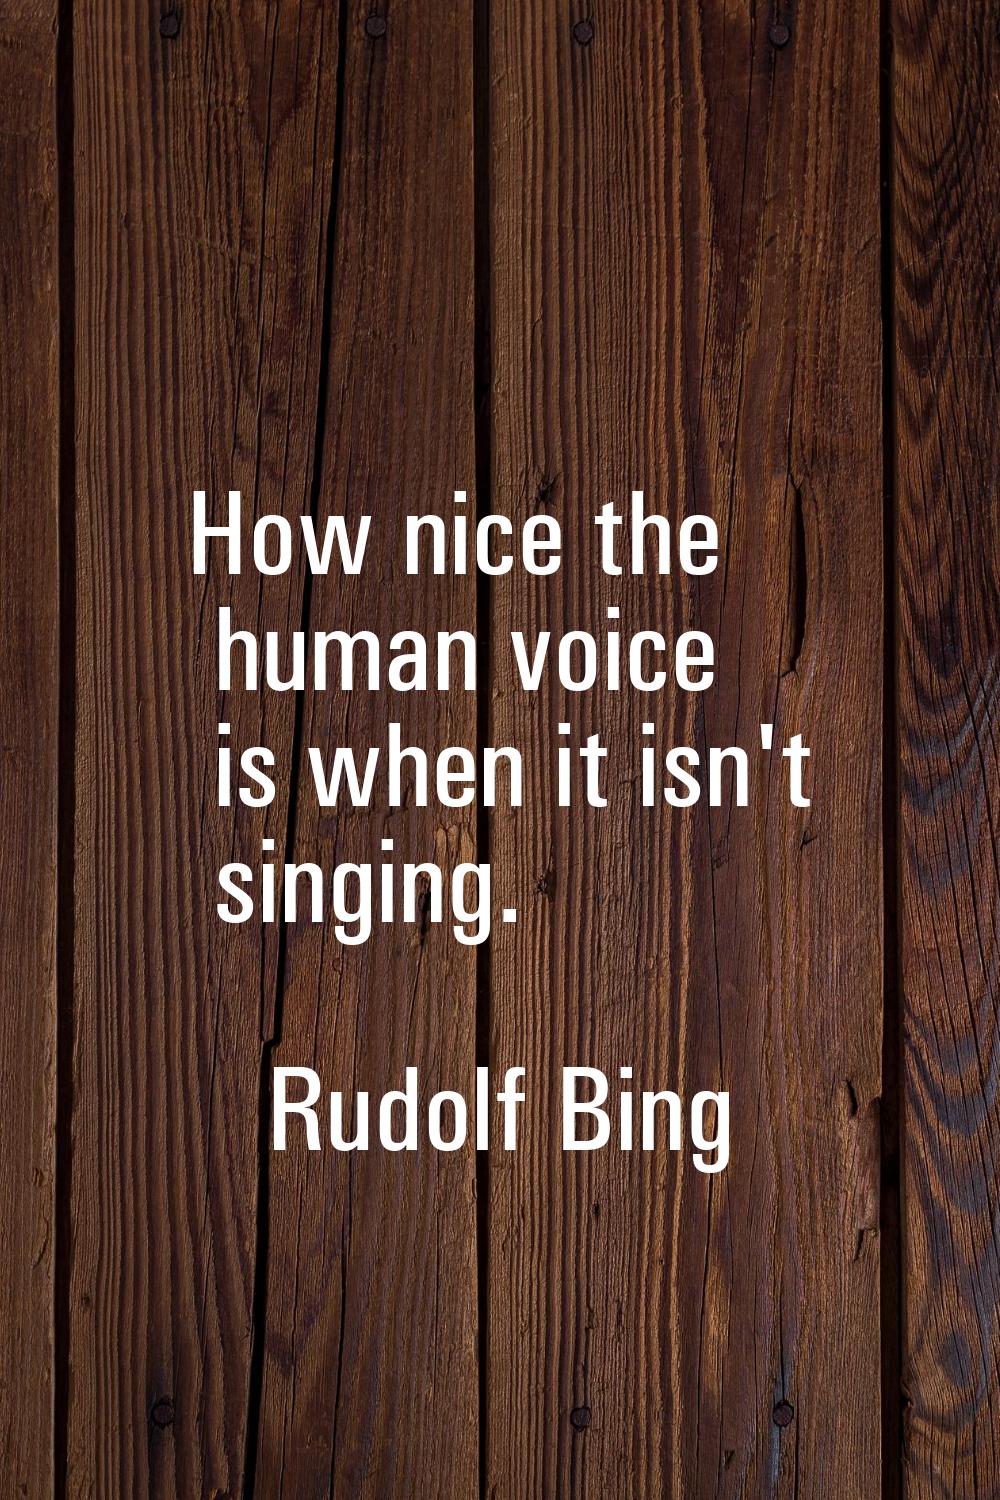 How nice the human voice is when it isn't singing.